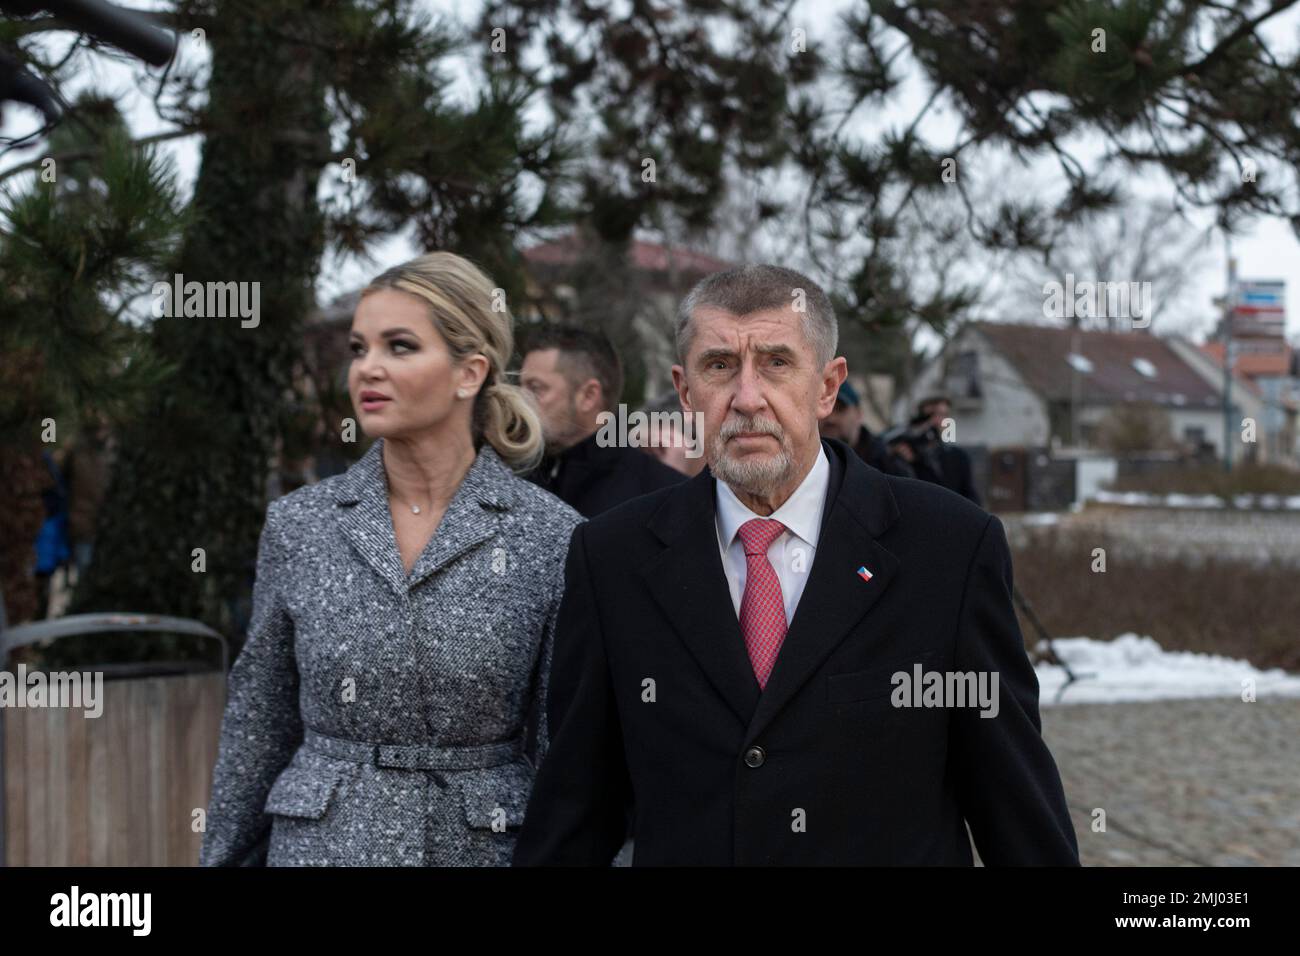 Presidential candidate and former Czech Republic's Prime Minister Andrej  Babis, front right, and his wife Monika Babisova, exit a polling station  after casting their ballots at the presidential election runoff in  Pruhonice,